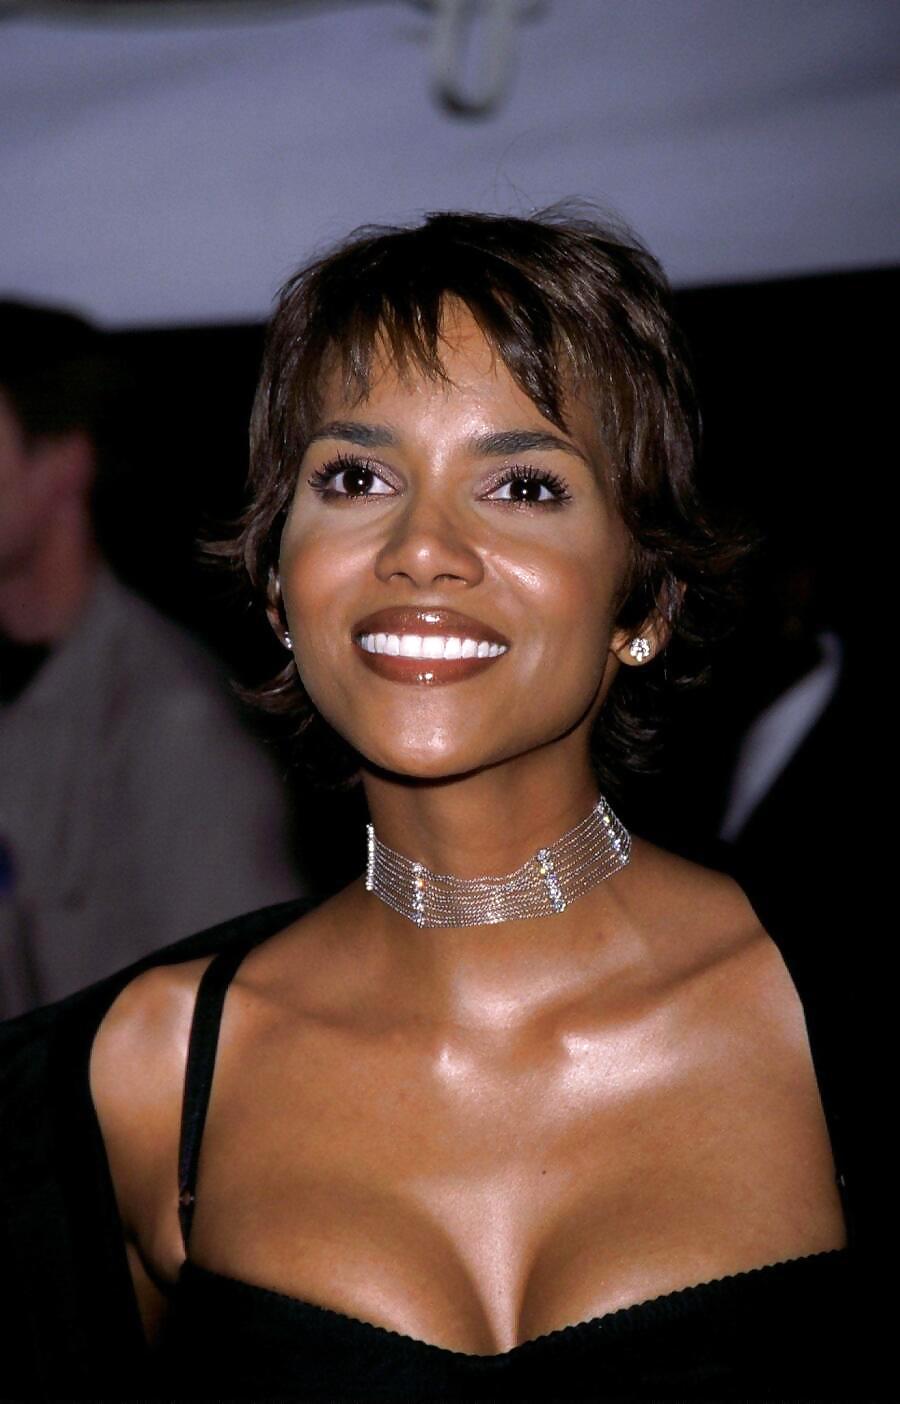 Halle berry ultimate glamour,cleavage,caps
 #8354264